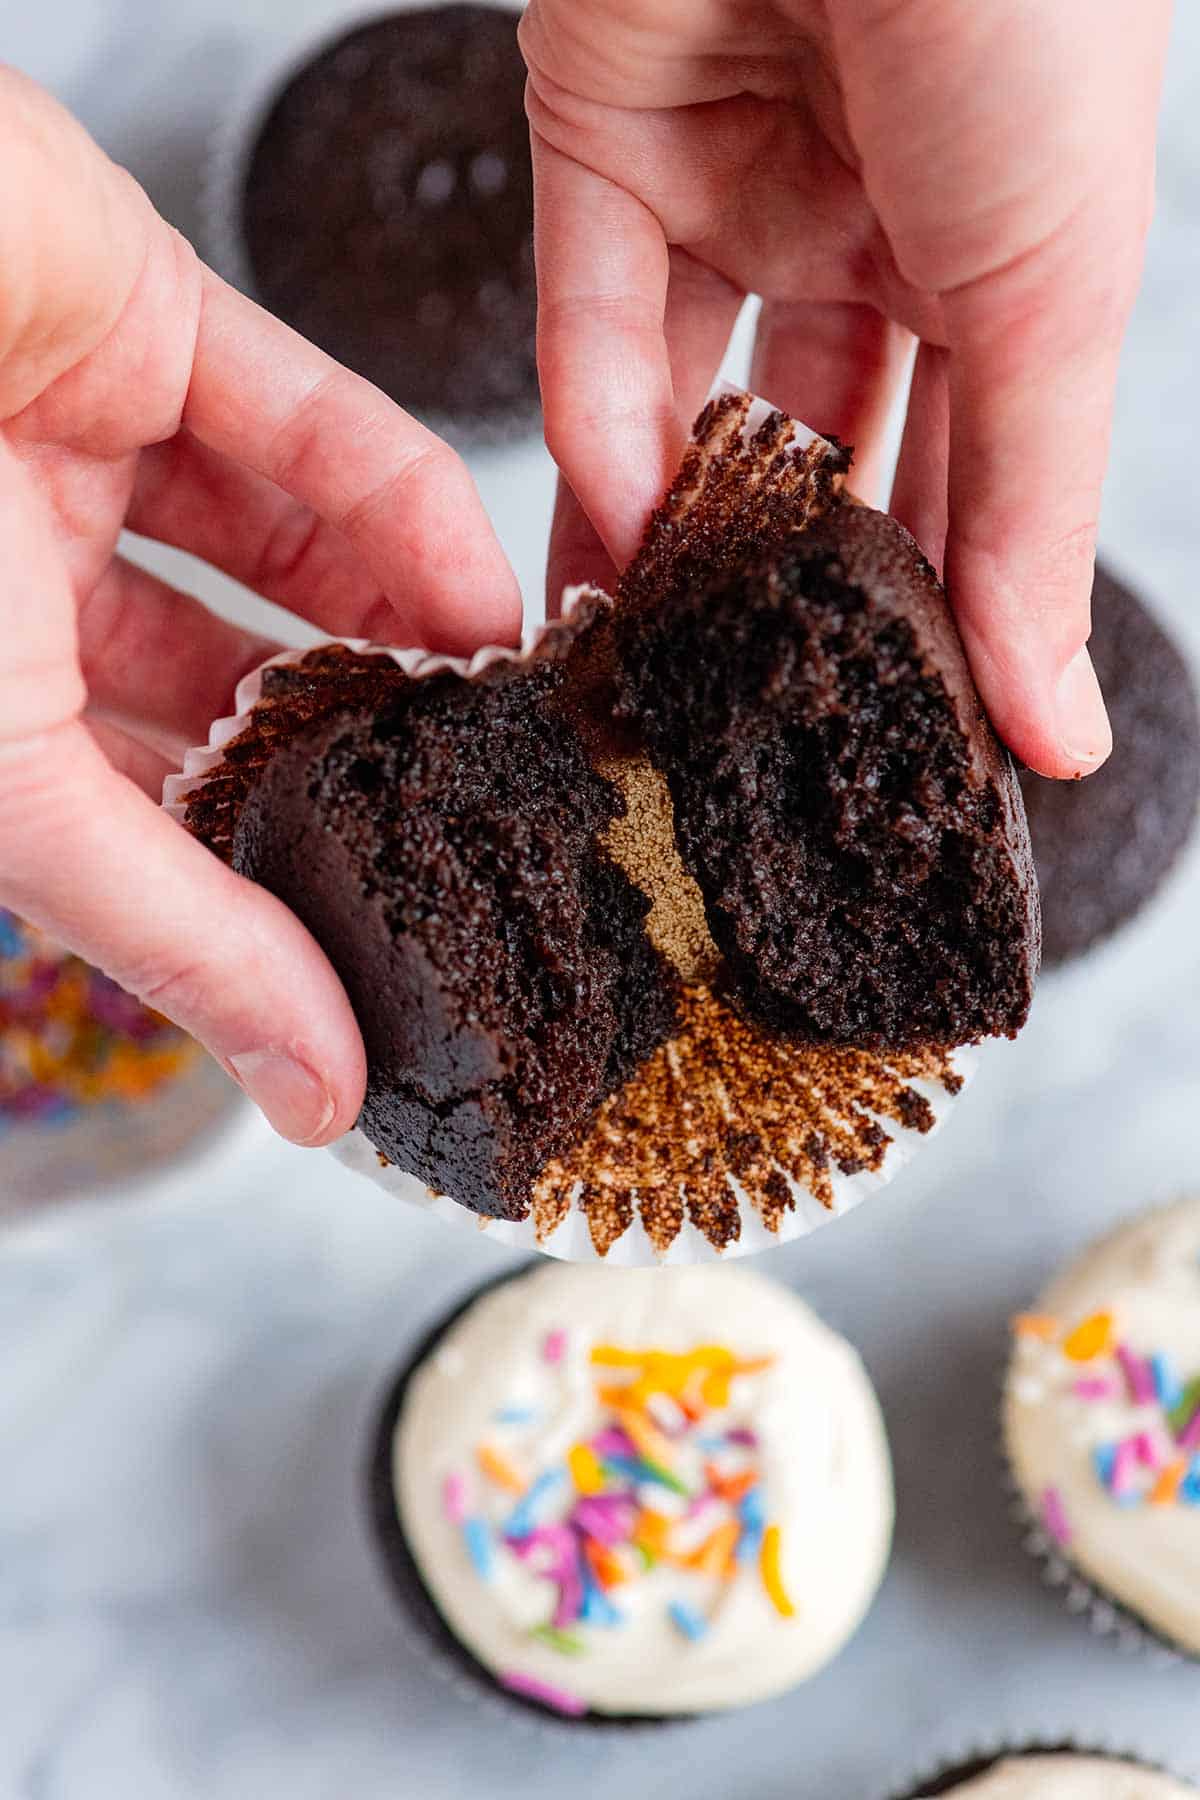 The middle of a baked chocolate cupcake.